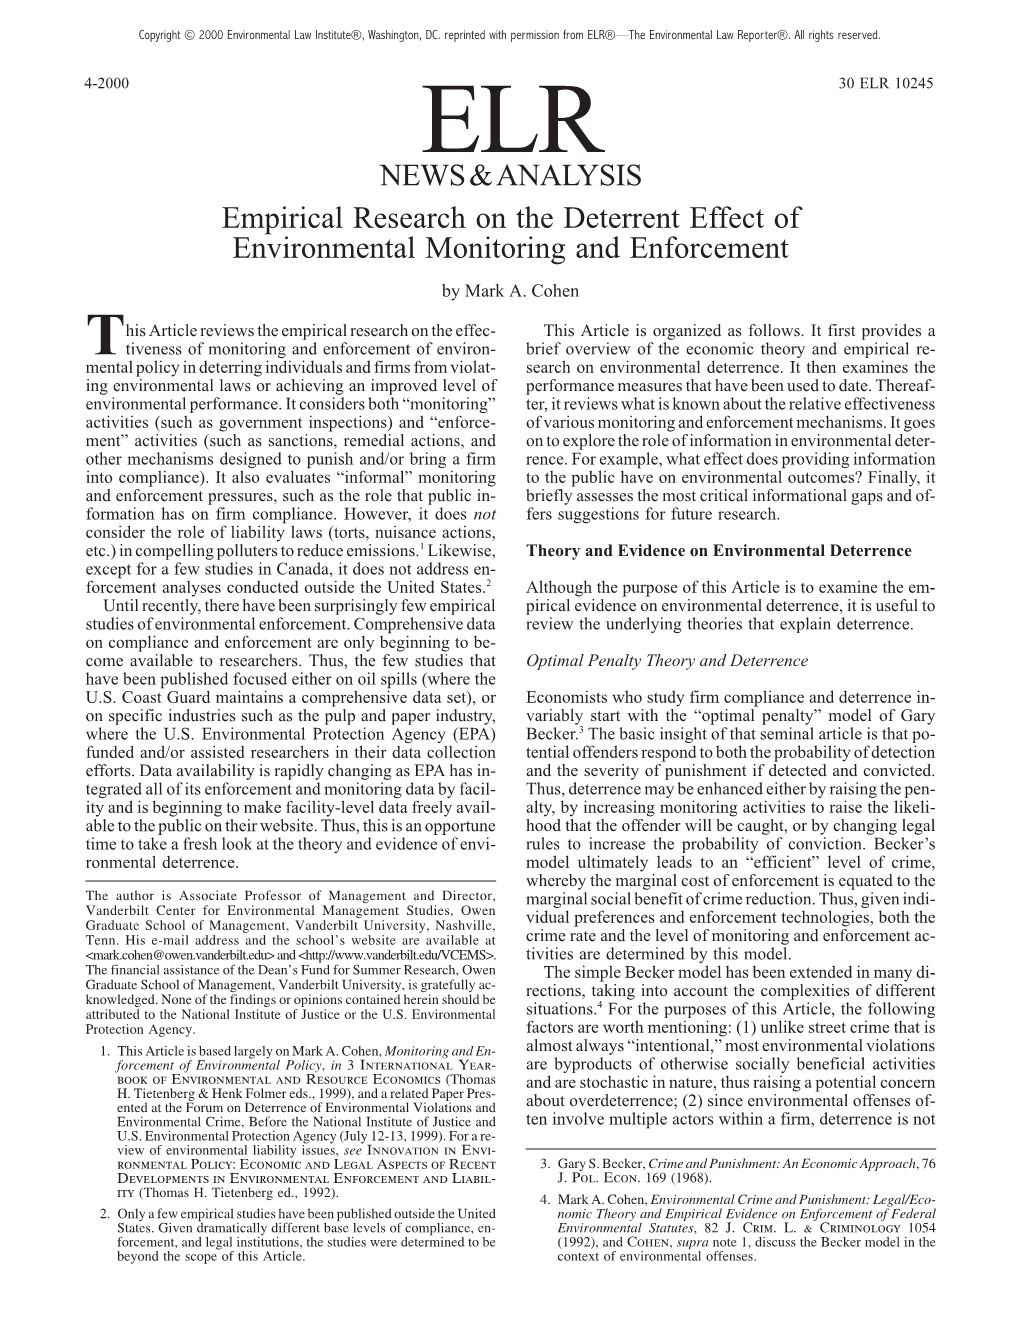 Empirical Research on the Deterrent Effect of Environmental Monitoring and Enforcement